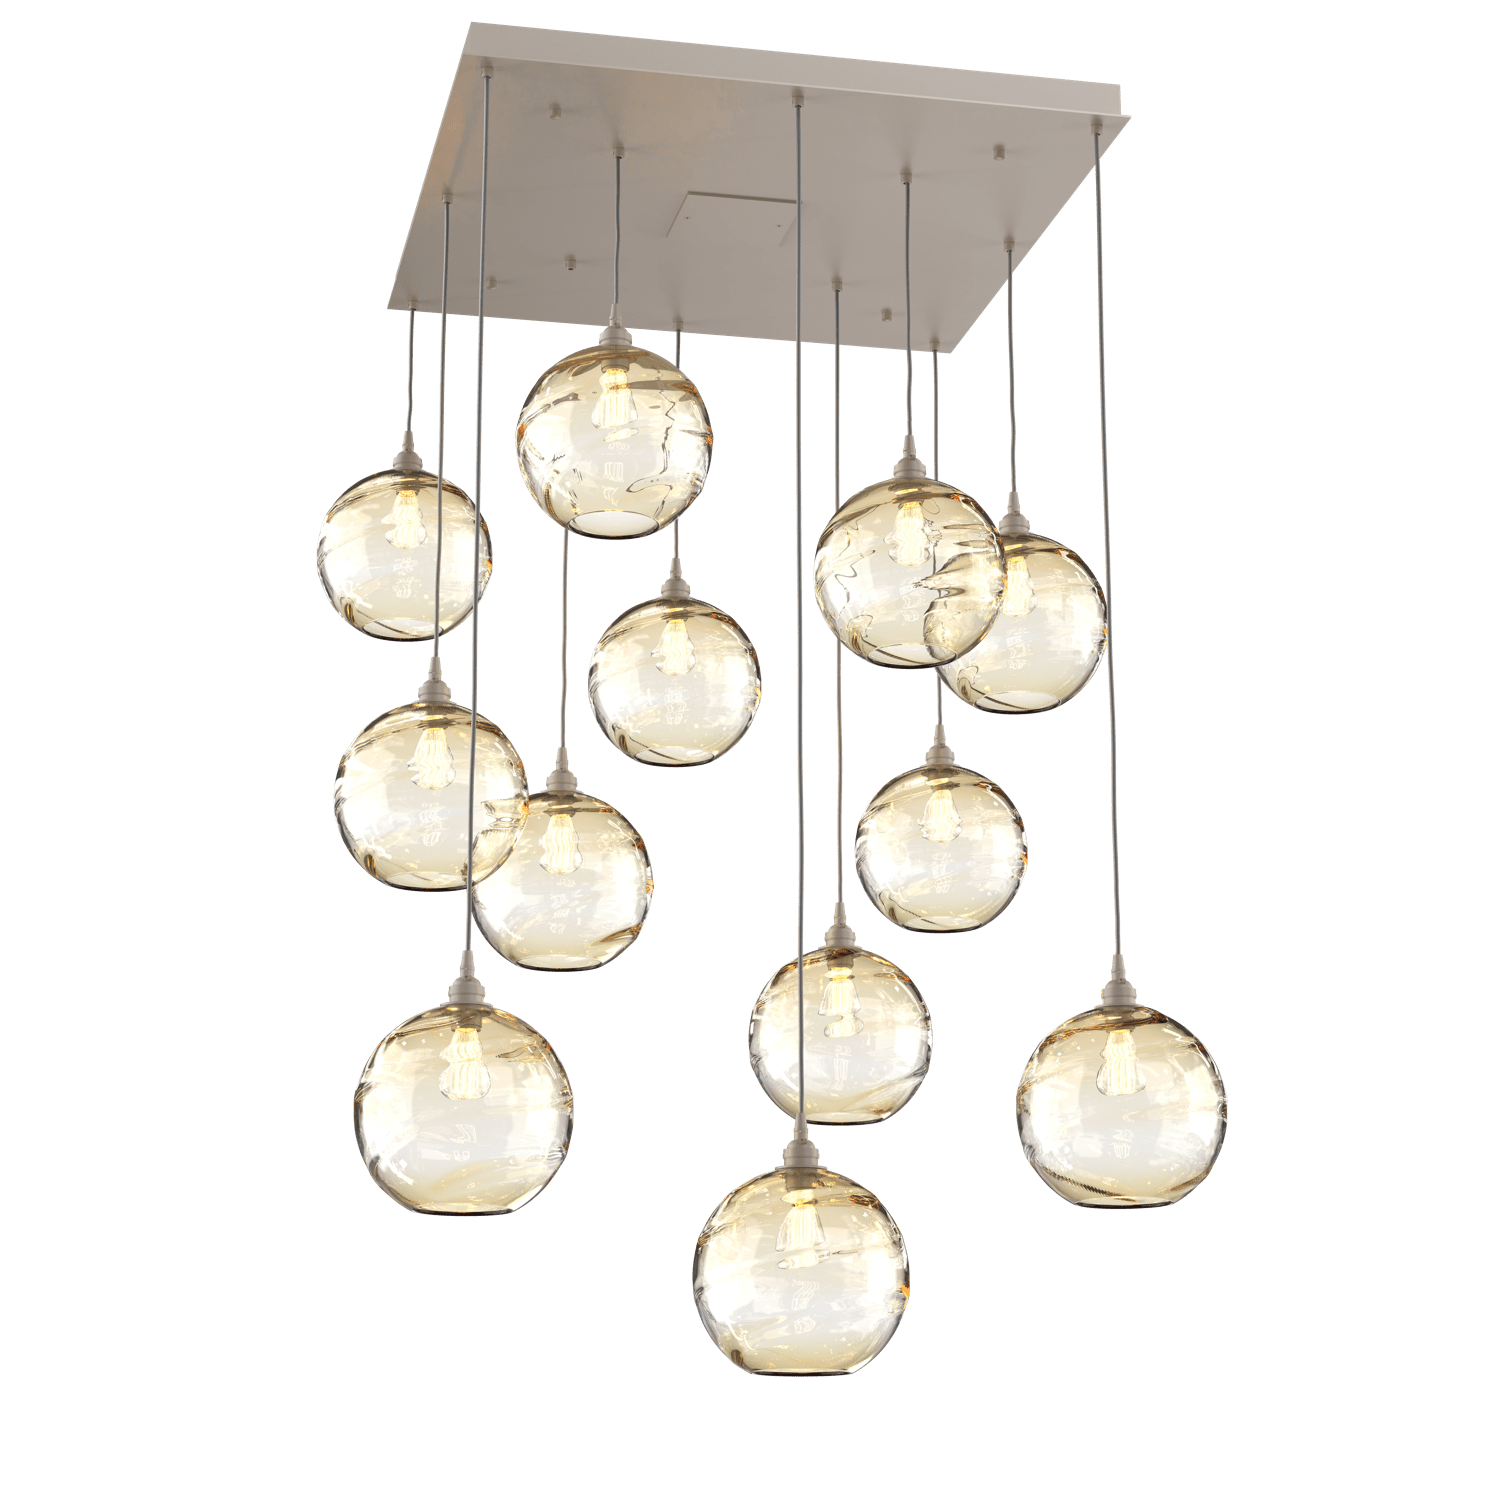 CHB0047-12-BS-OA-Hammerton-Studio-Optic-Blown-Glass-Terra-12-light-square-pendant-chandelier-with-metallic-beige-silver-finish-and-optic-amber-blown-glass-shades-and-incandescent-lamping